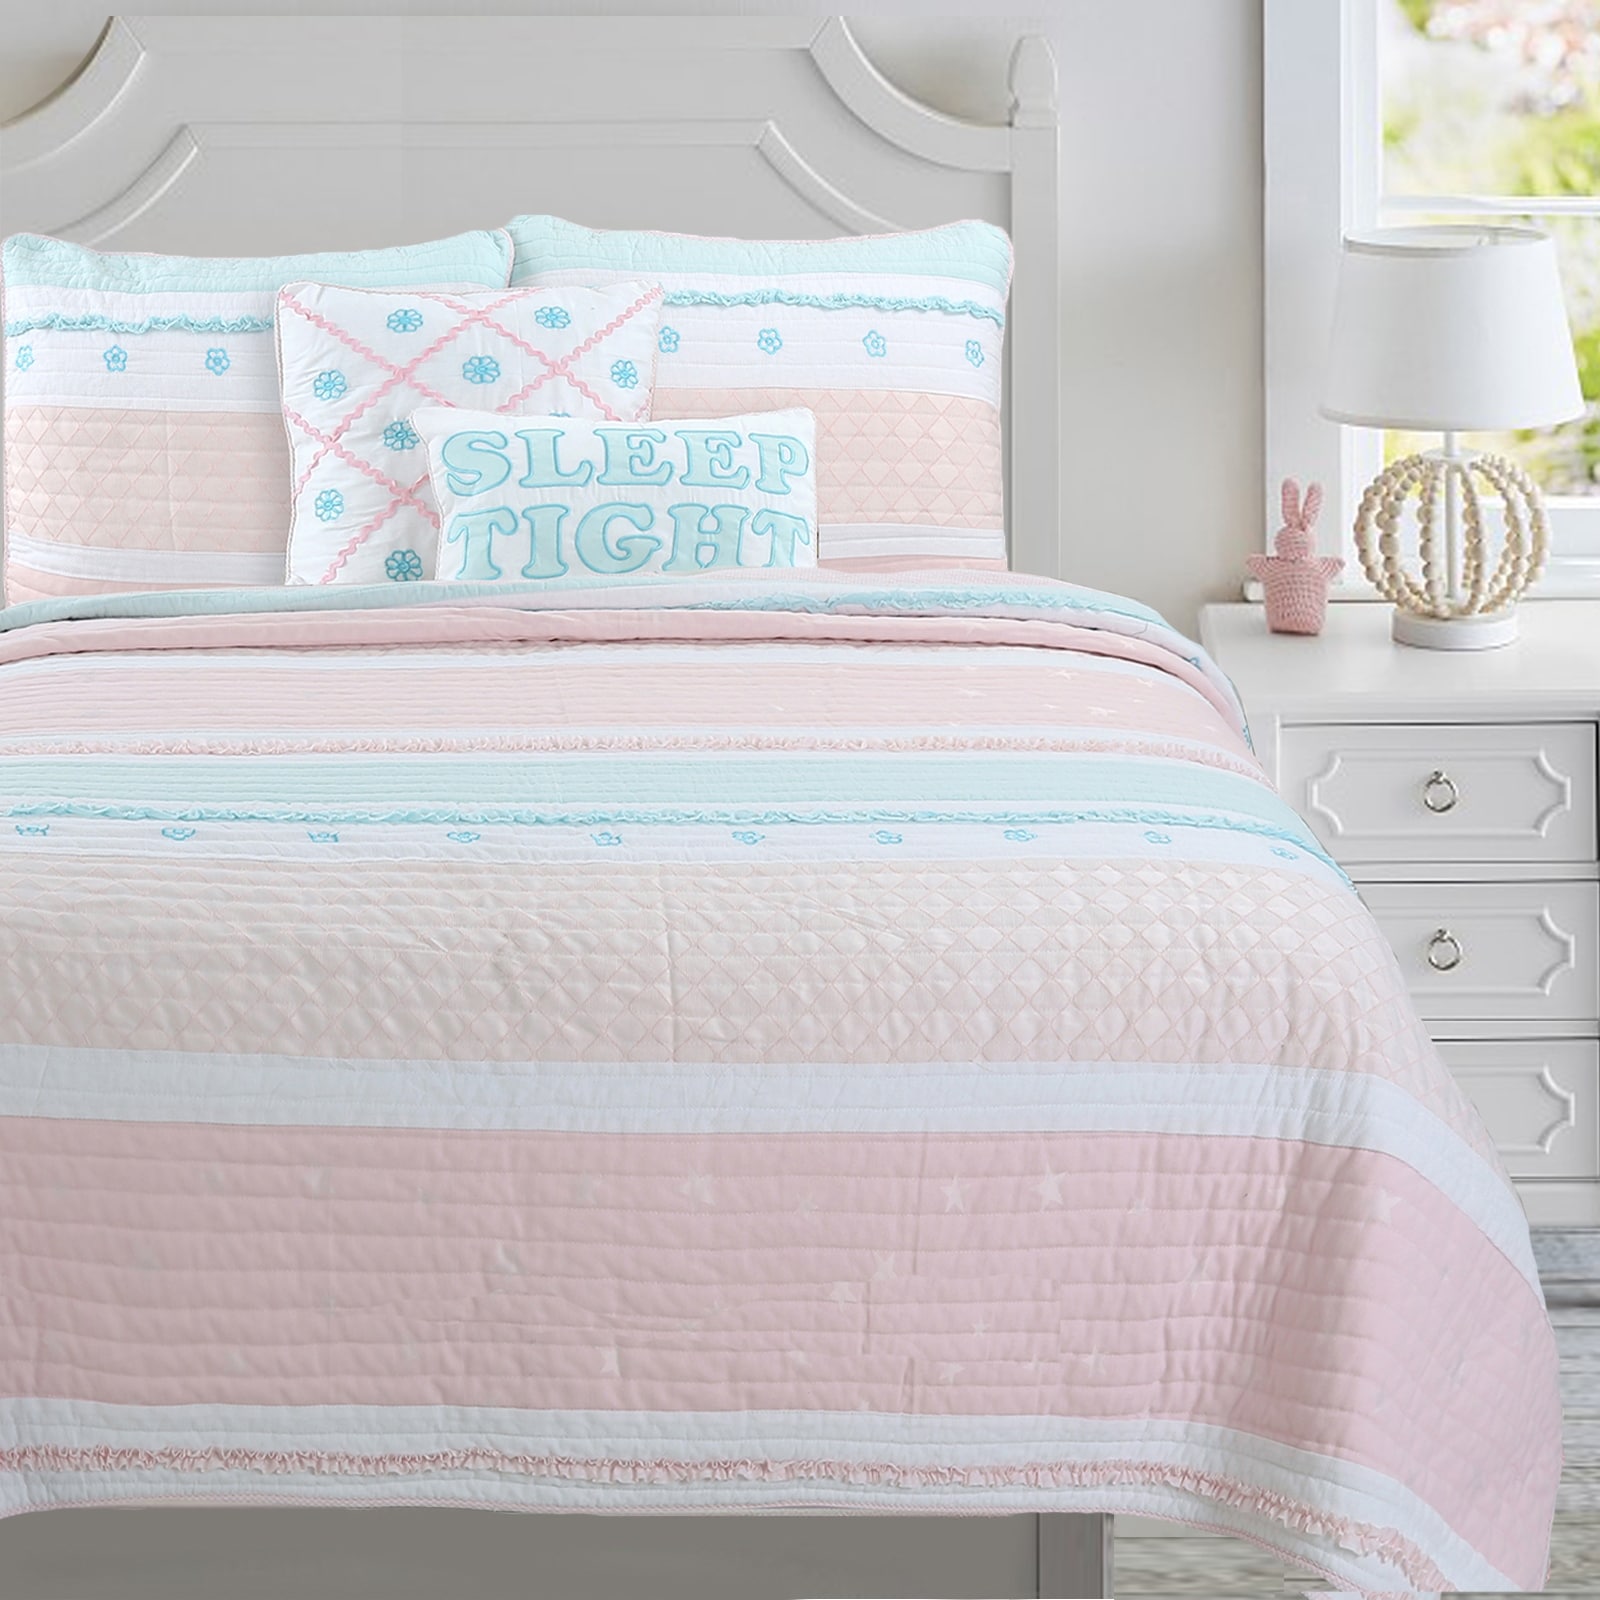 Floral Bloom Peach Bedding king, For Home